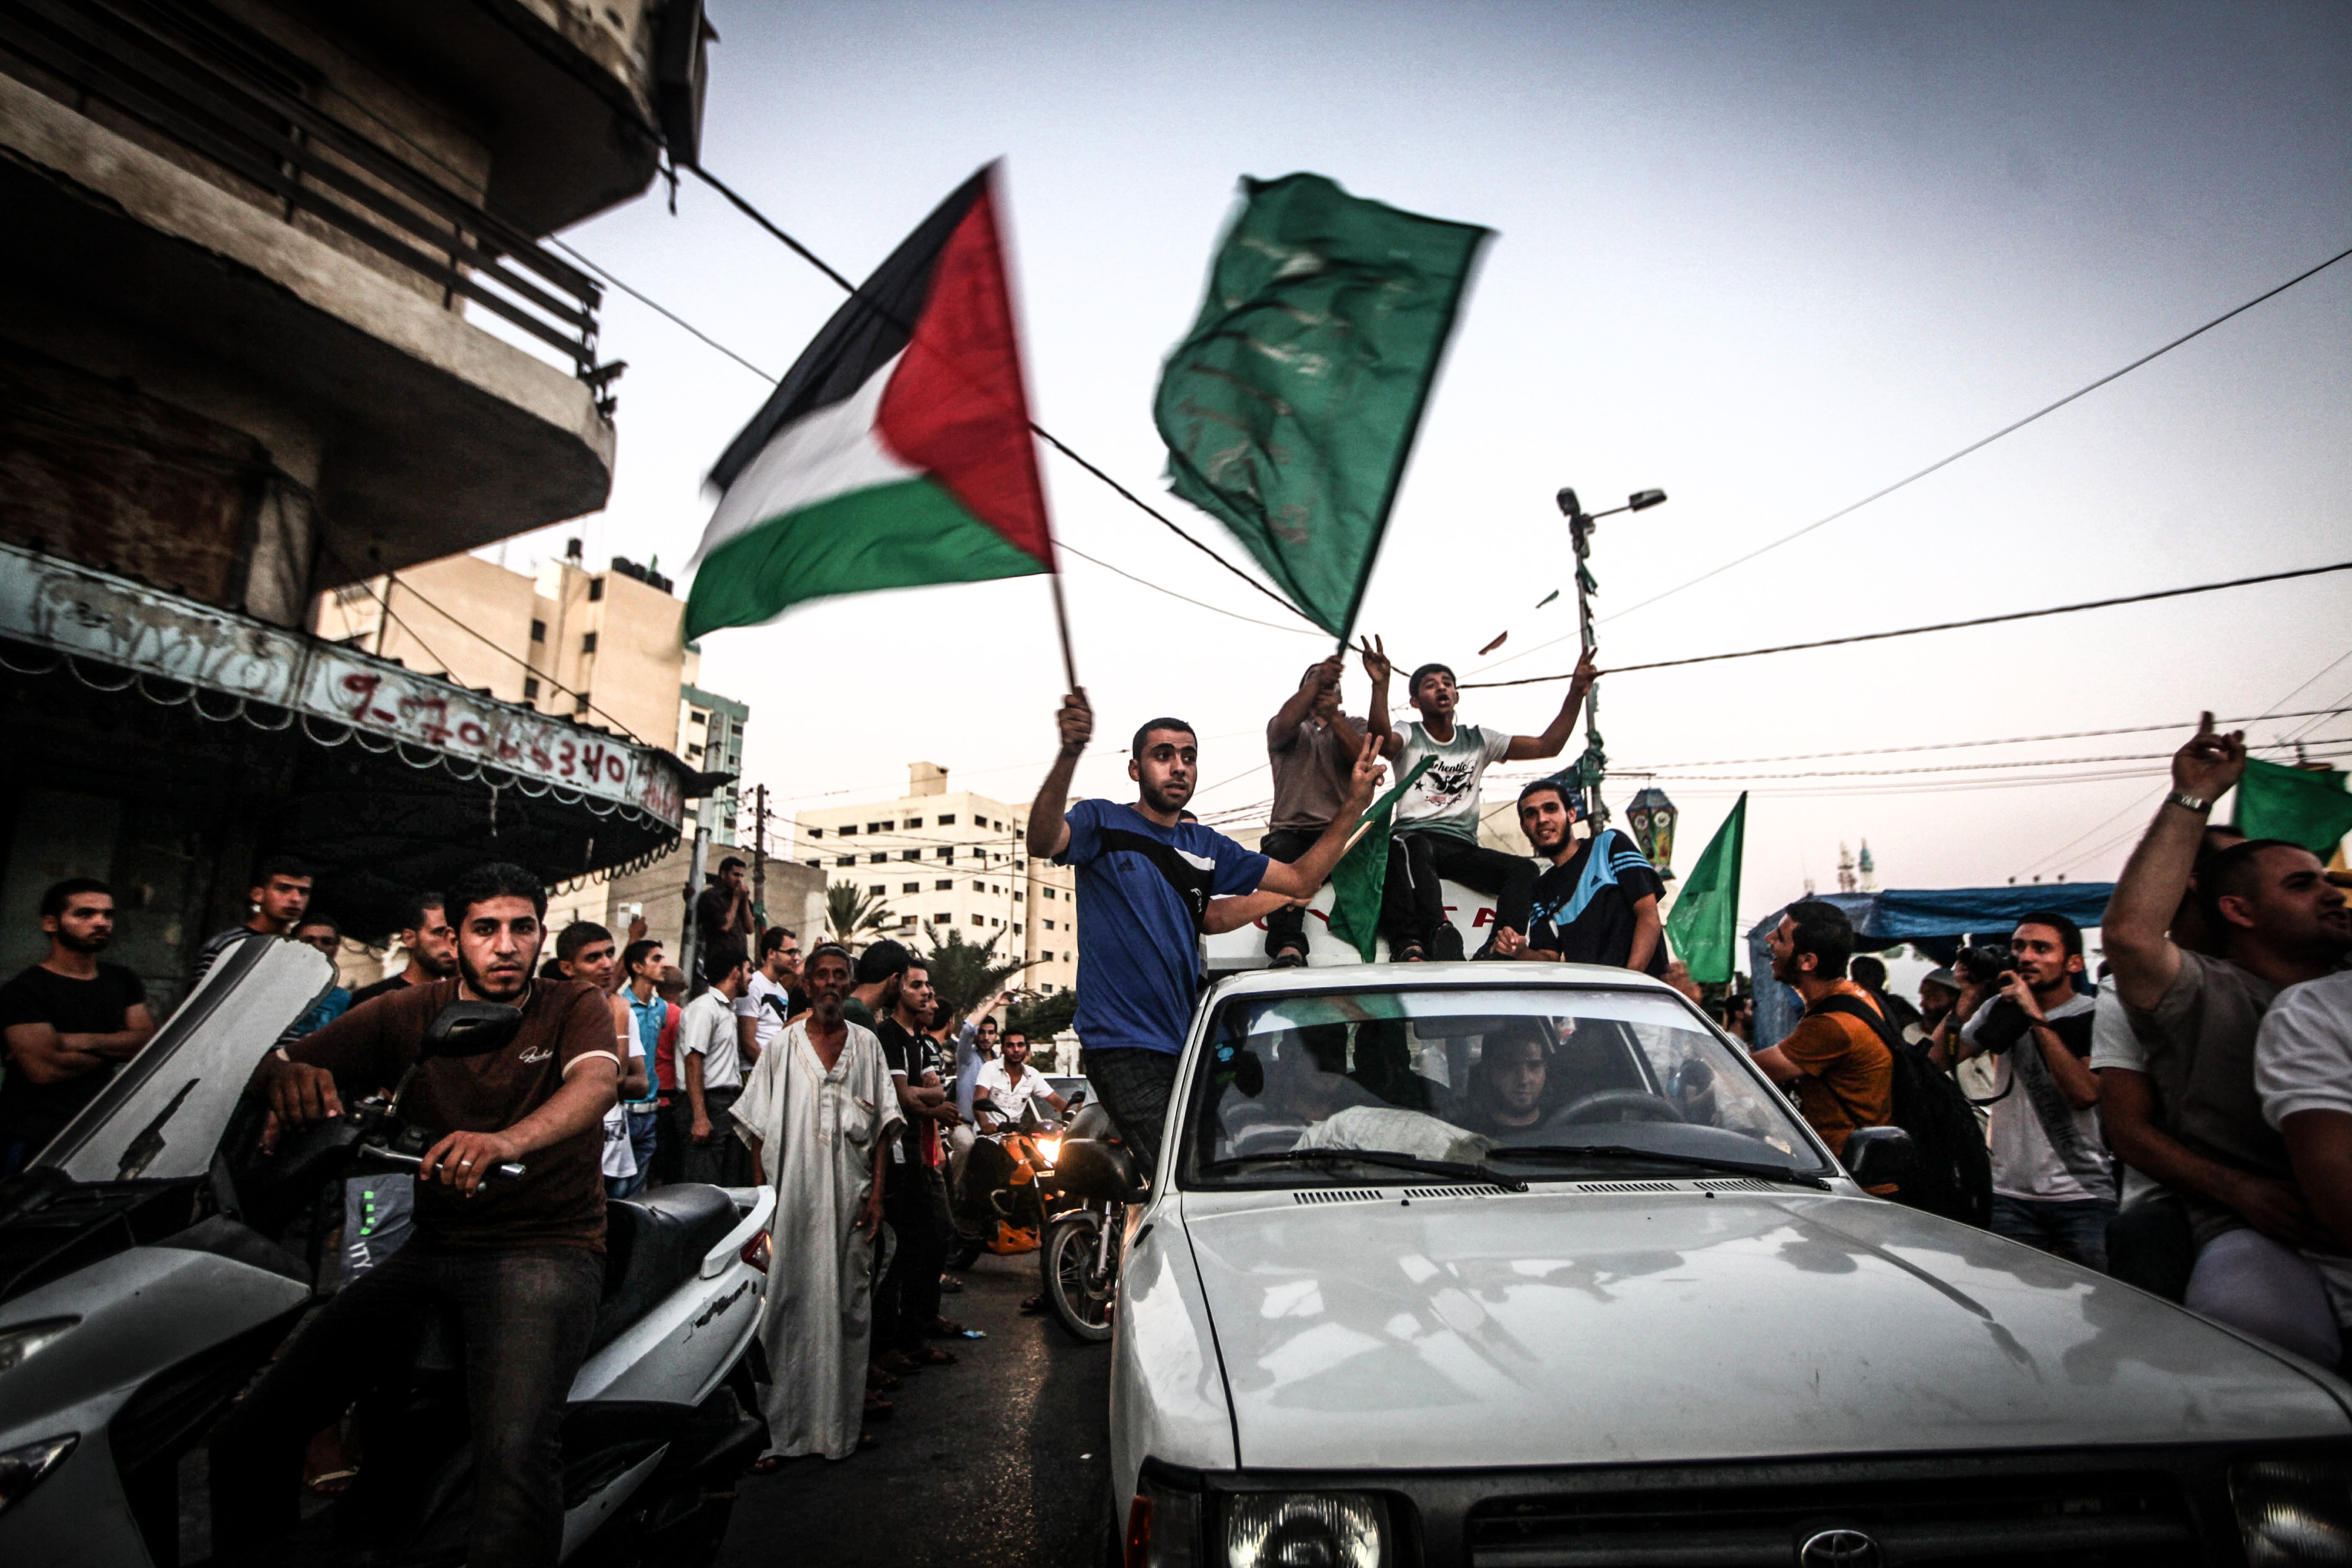 Palestinians in Gaza City celebrate in the streets after a deal had been reached between Hamas and Israel over a long-term end to seven weeks of fighting in the Gaza Strip on Aug. 26, 2014 (Momen Faiz—NurPhoto/Corbis)